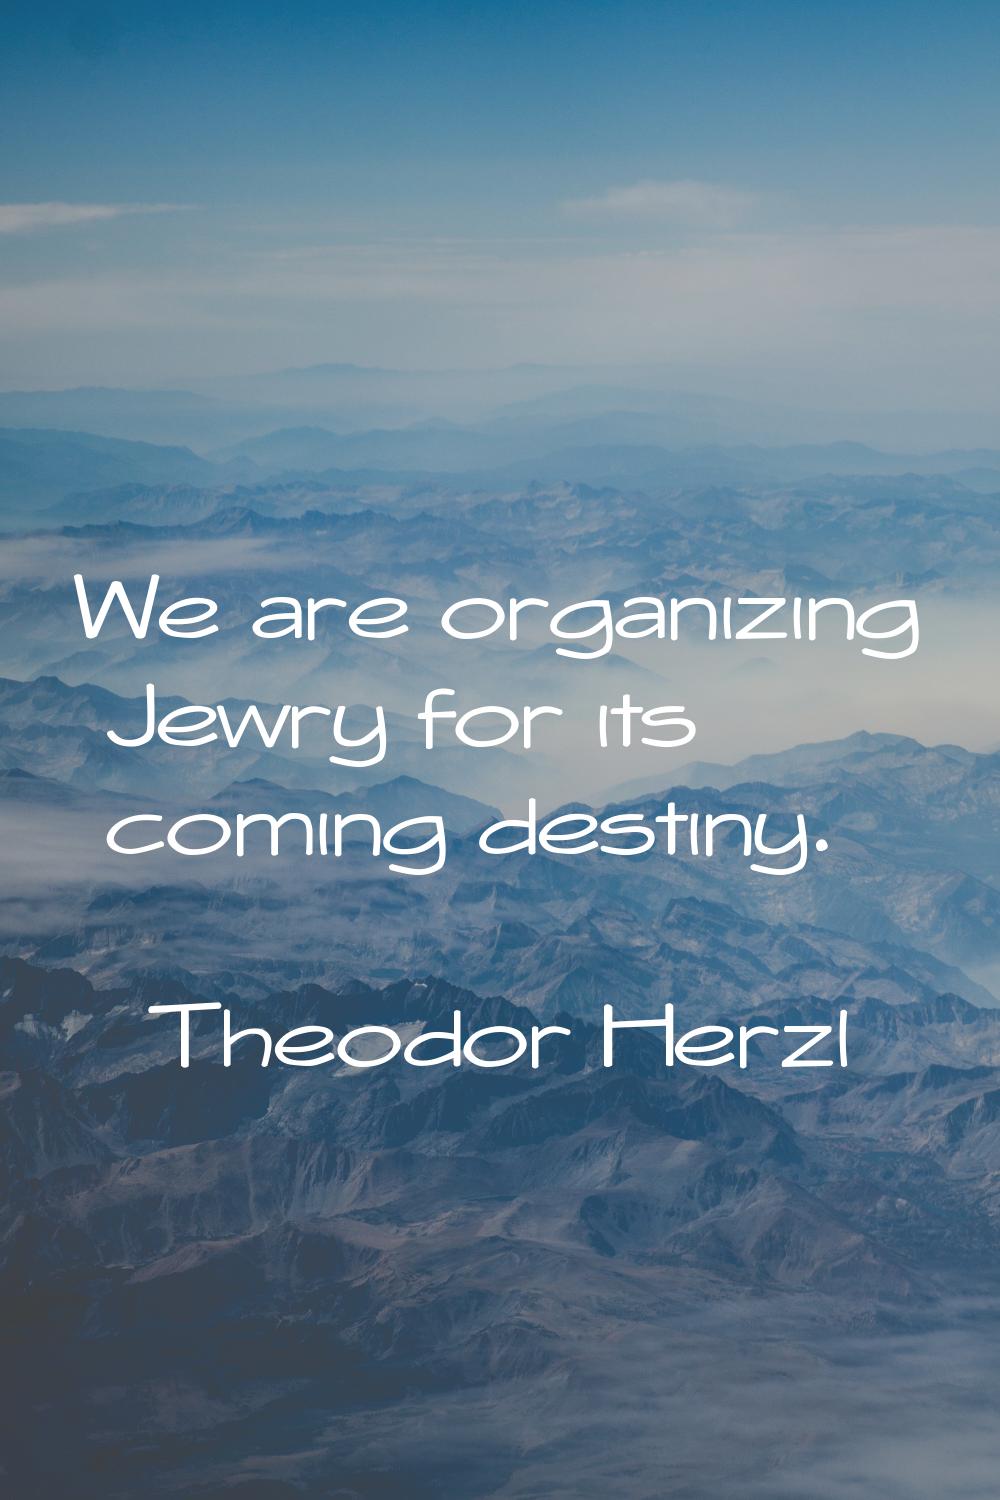 We are organizing Jewry for its coming destiny.